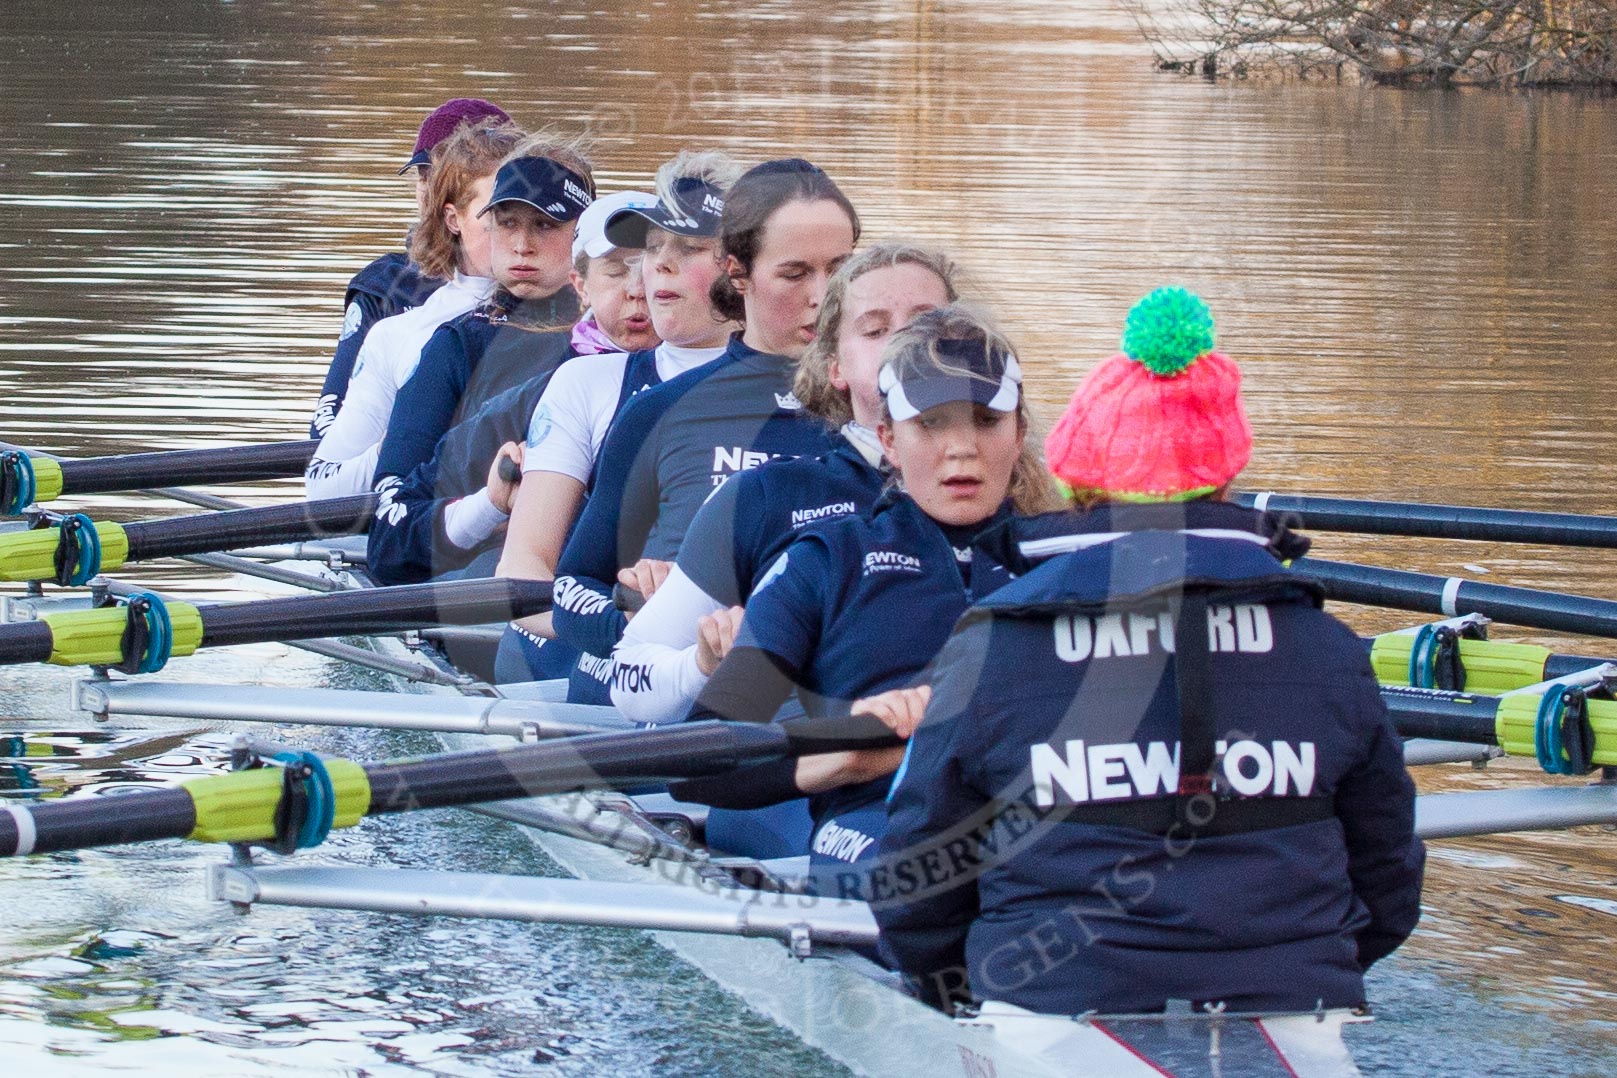 The Boat Race season 2013 - OUWBC training: The OUWBC Blue Boat during the training session - bow Mariann Novak, Alice Carrington-Windo, Mary Foord-Weston, Jo Lee, Amy Varney, Harriet Keane, Anastasia Chitty, stroke Maxie Scheske, and cox Katie Apfelbaum..
River Thames,
Wallingford,
Oxfordshire,
United Kingdom,
on 13 March 2013 at 17:15, image #121